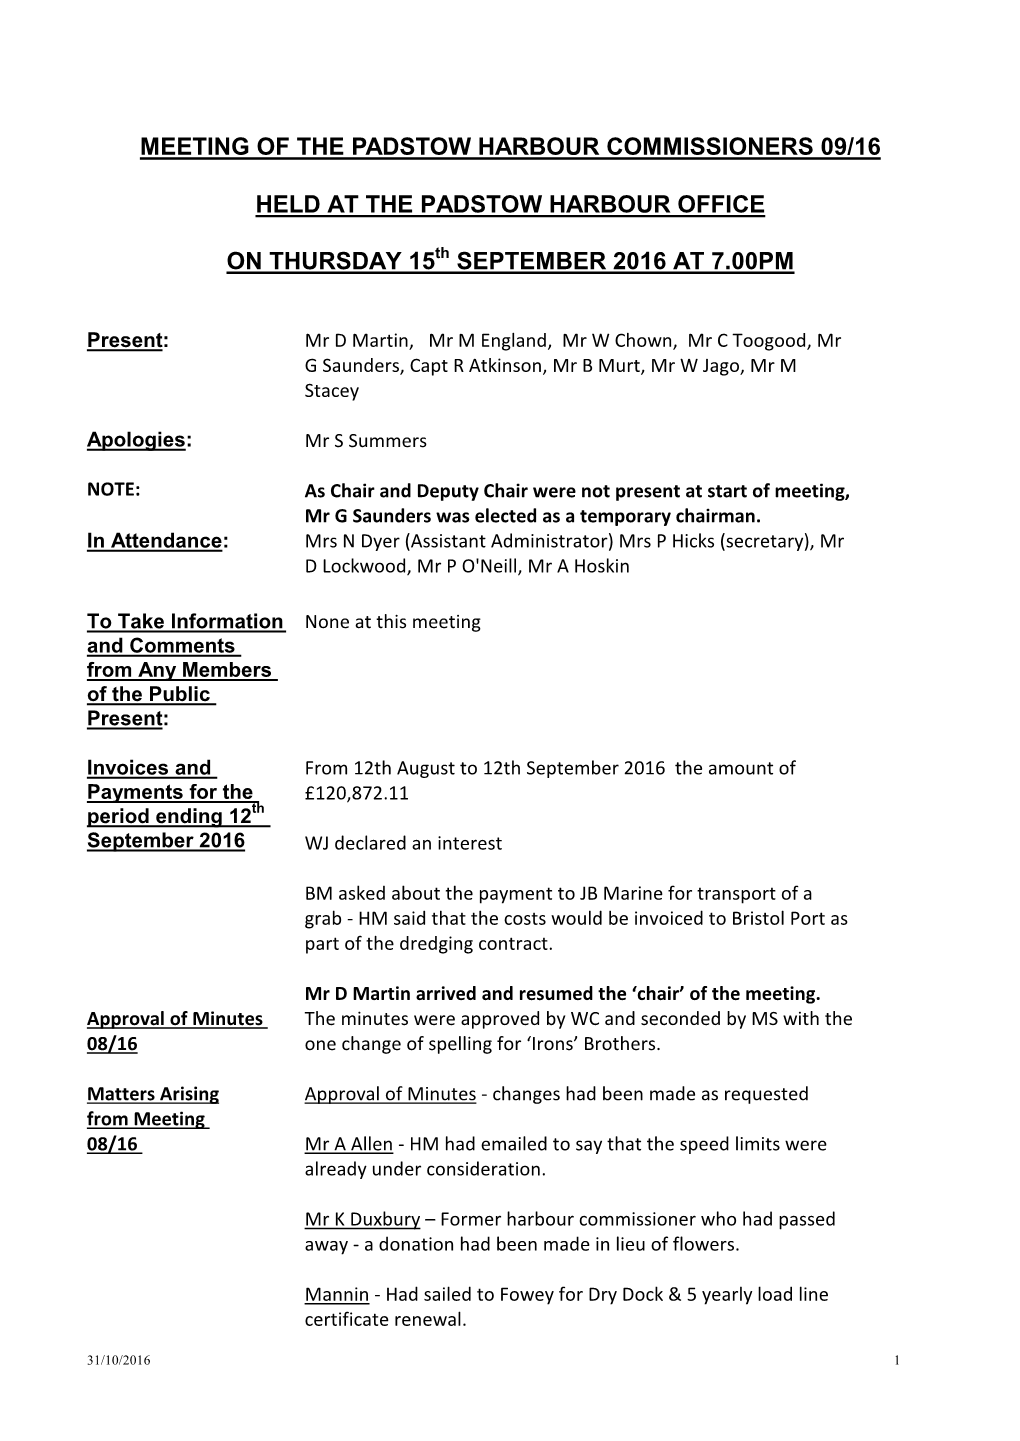 Meeting of the Padstow Harbour Commissioners 09/16